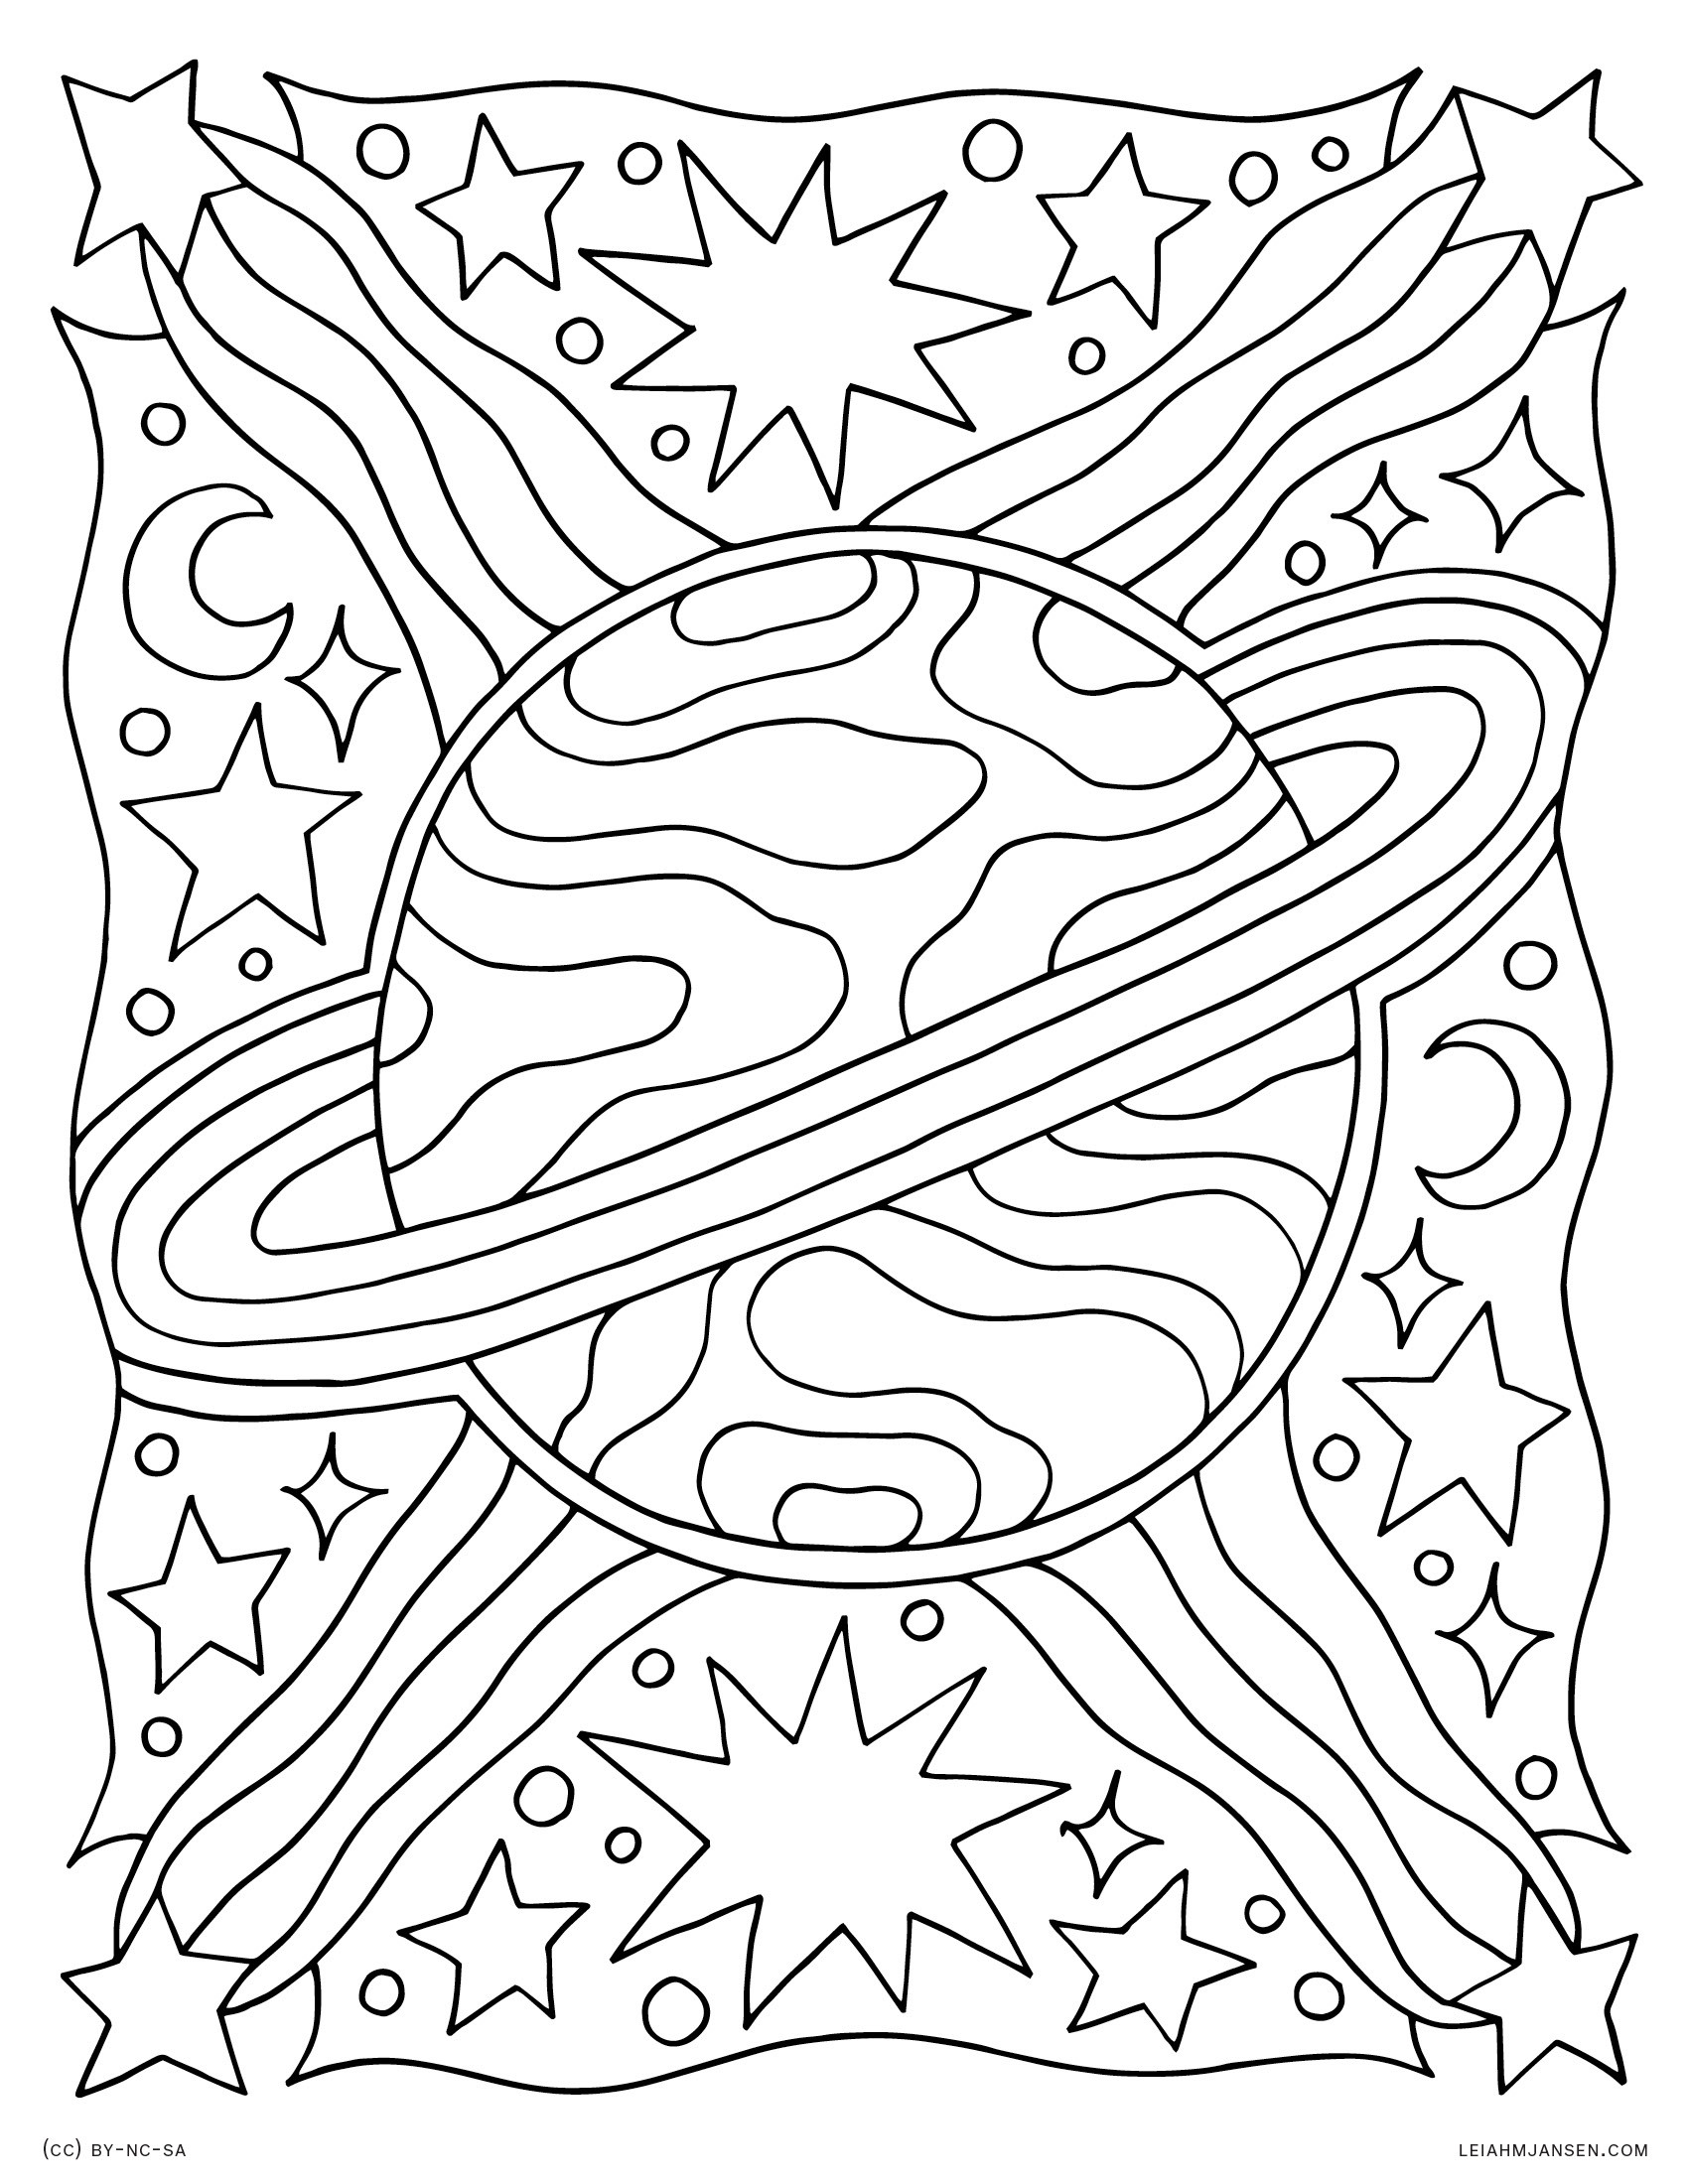 Outer Space Coloring Pages For Adults
 Coloring Pages